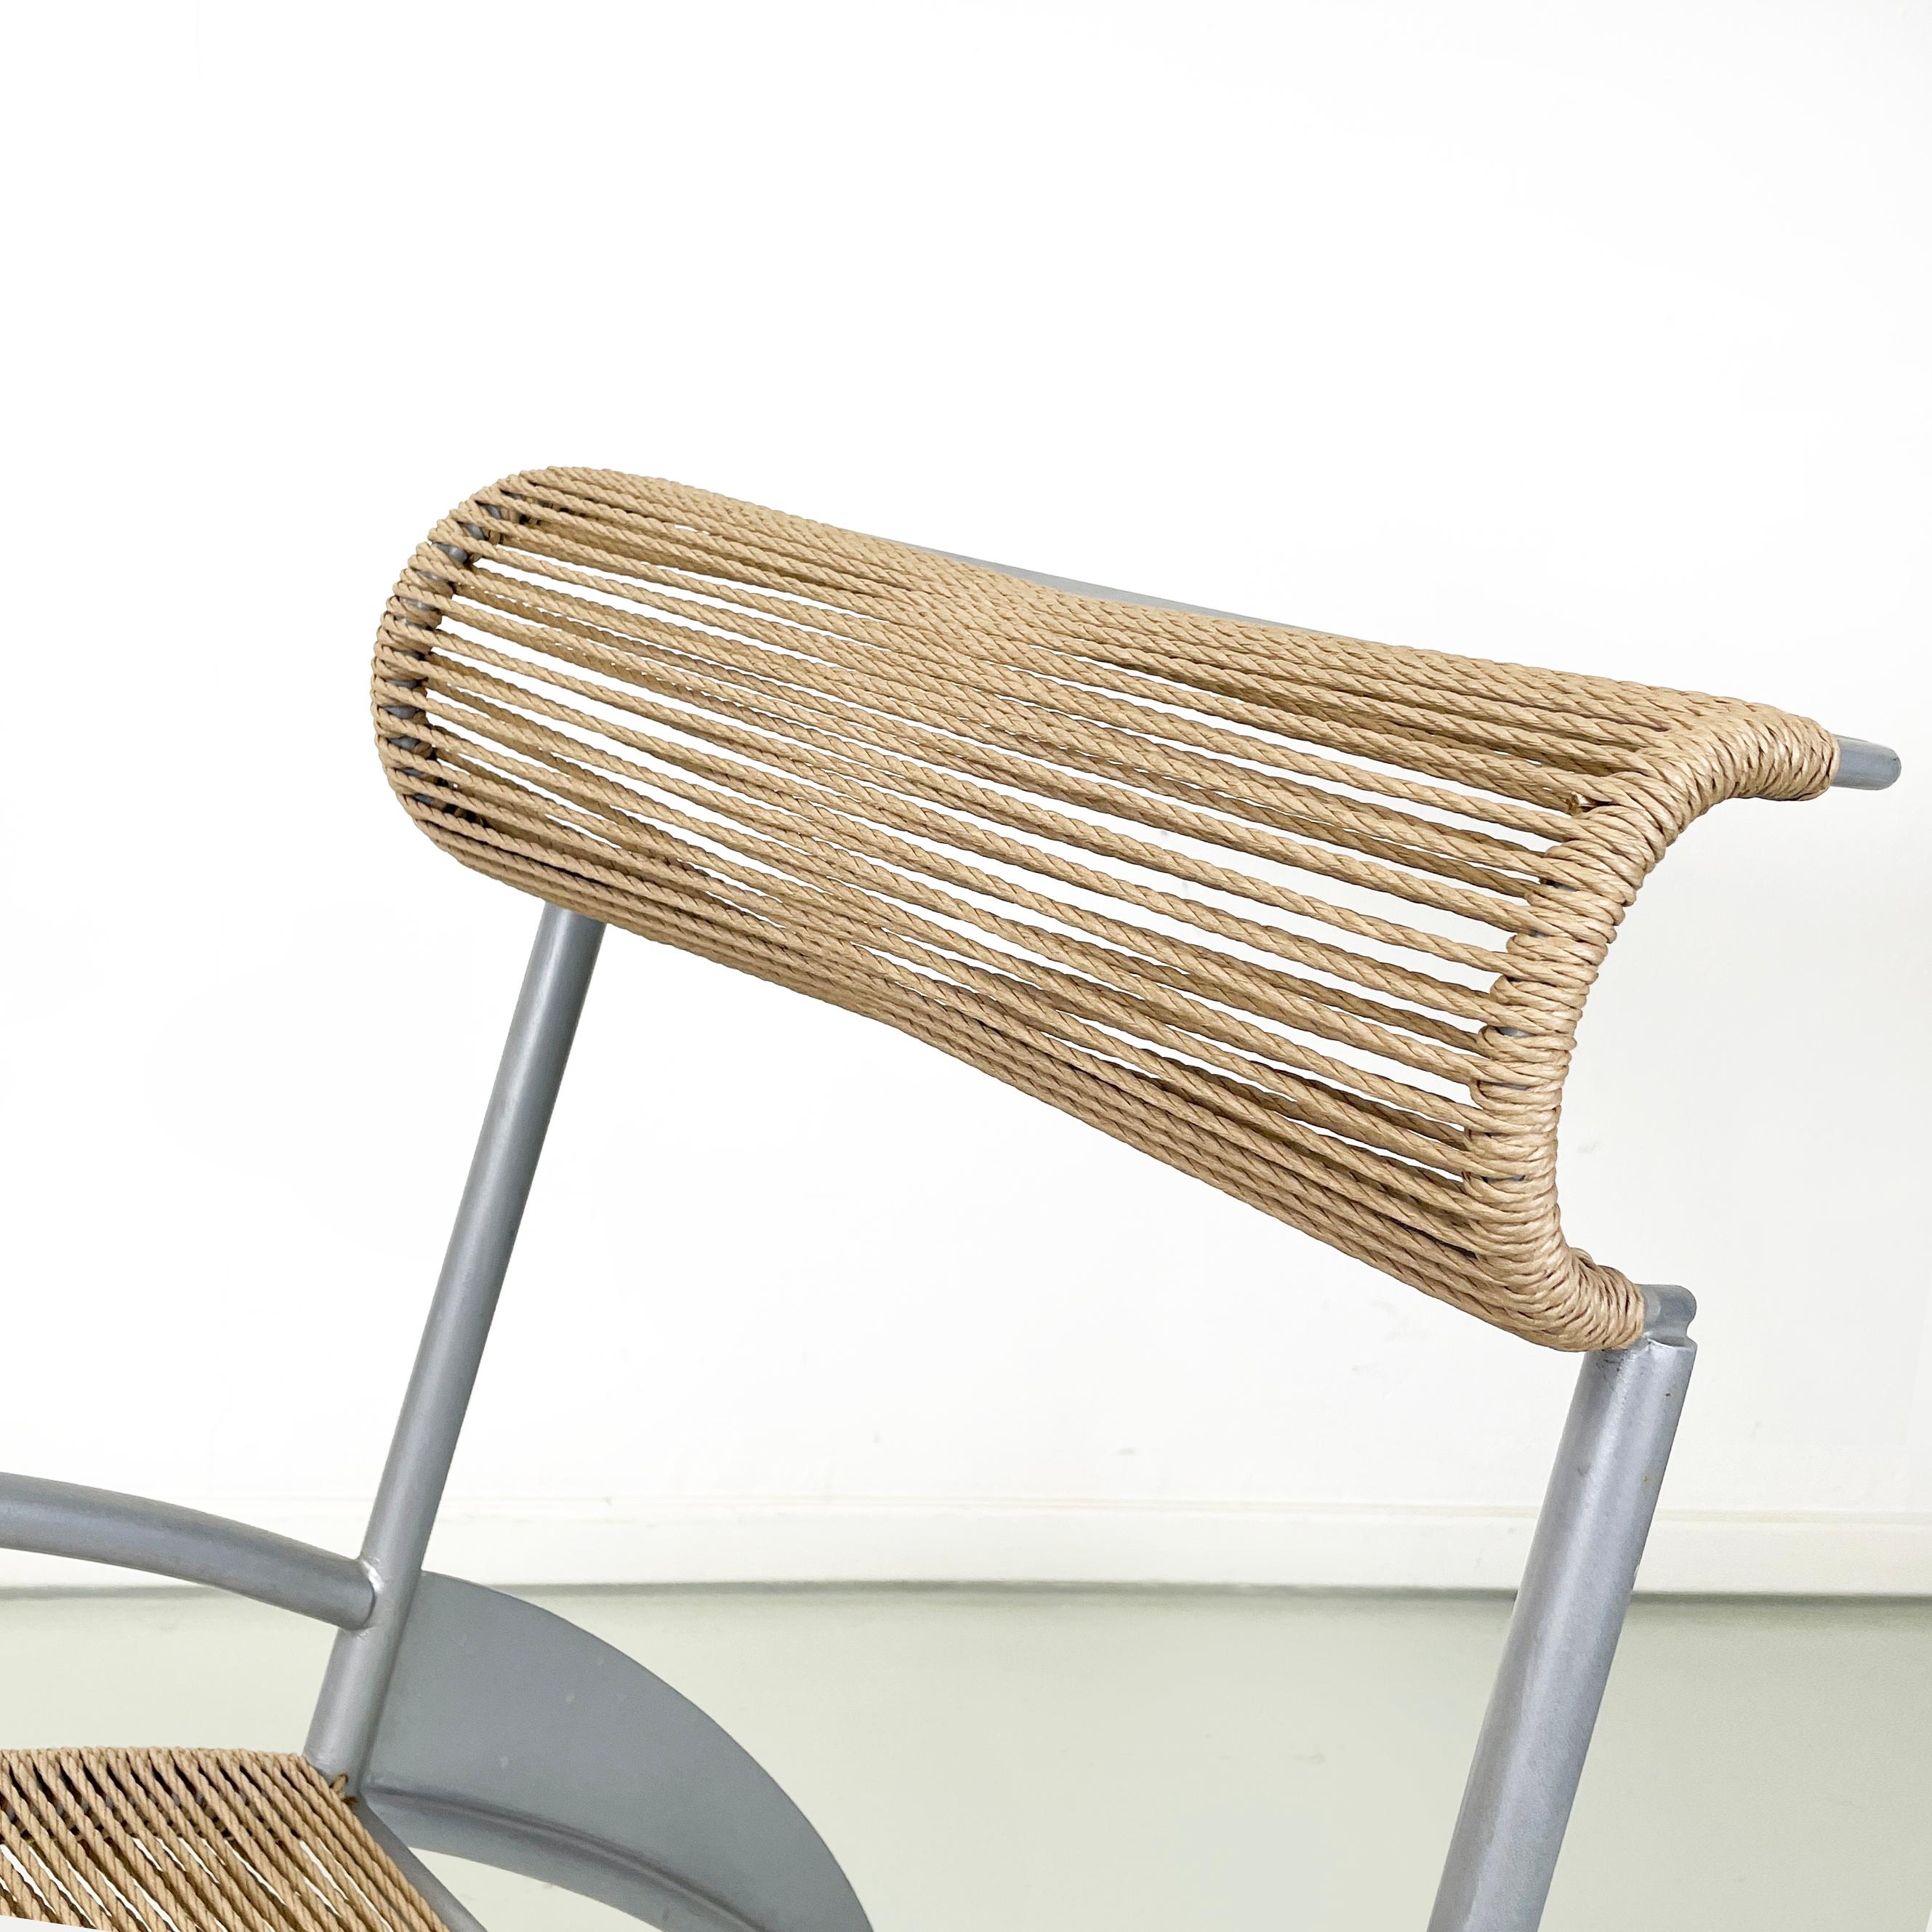 Steel Italian modern rope and gray steel chair Juliette by Massimo Iosa-Ghini, 1990s For Sale